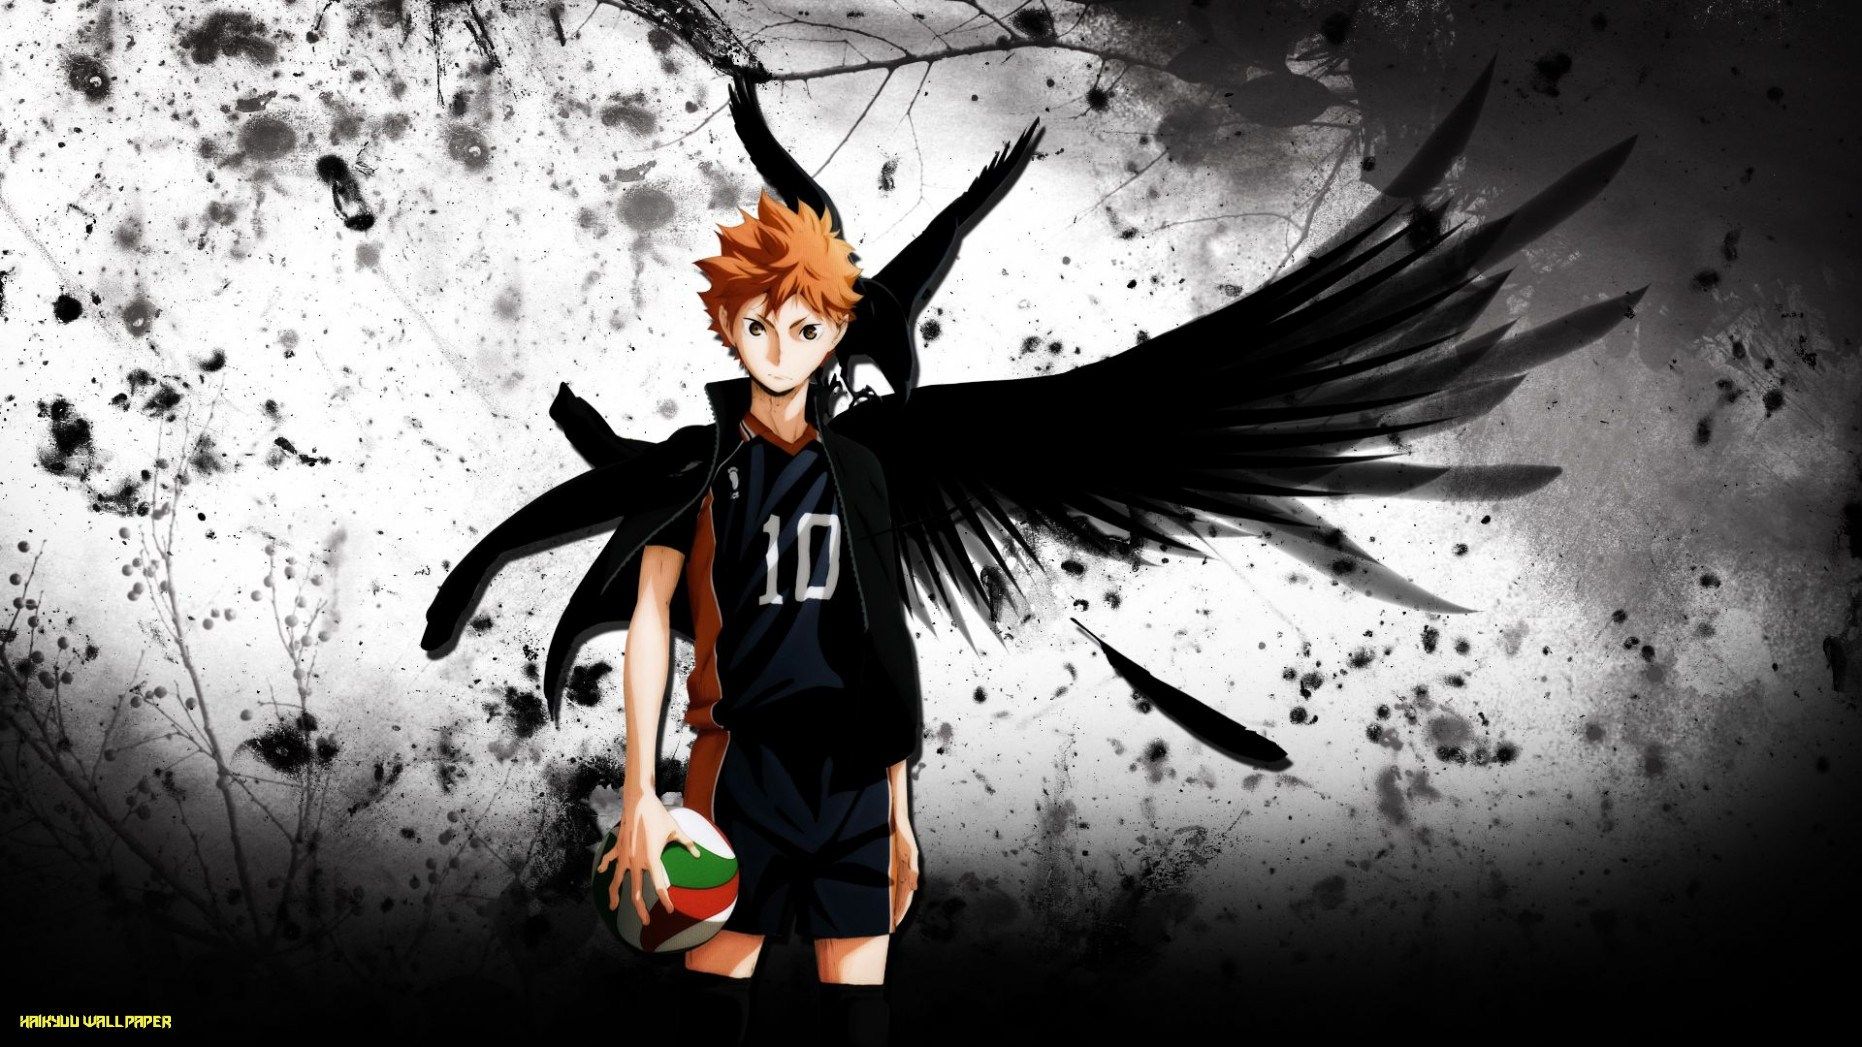 Reasons Why Haikyuu Wallpaper Is Getting More Popular In The Past